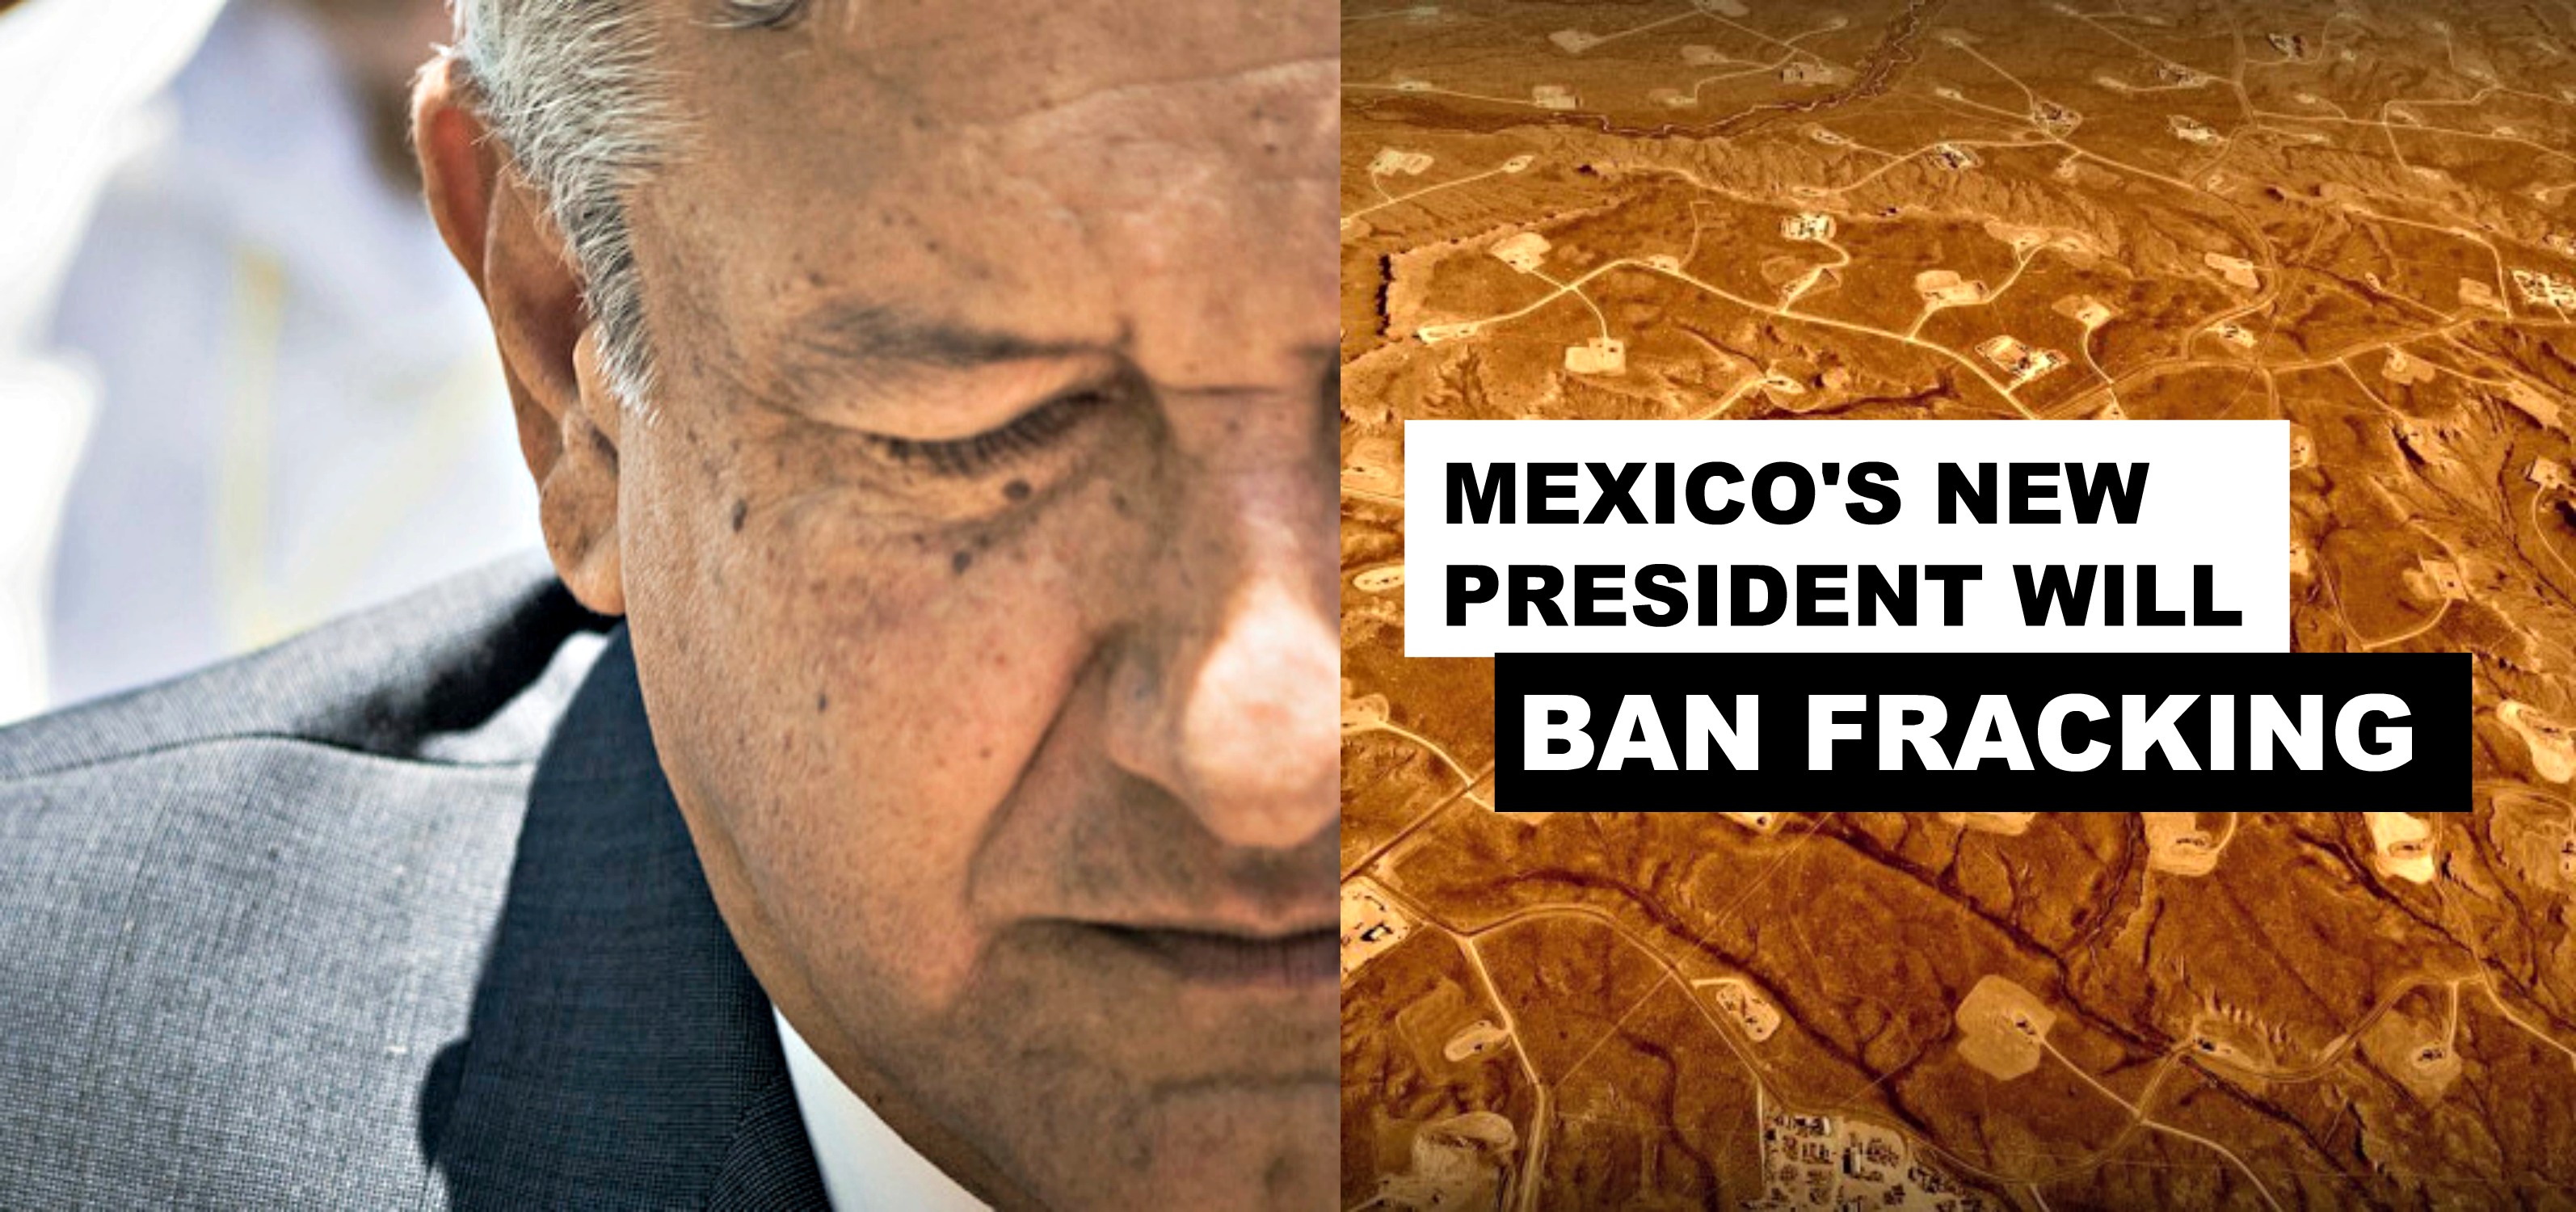 Mexico's New President Will Ban Fracking